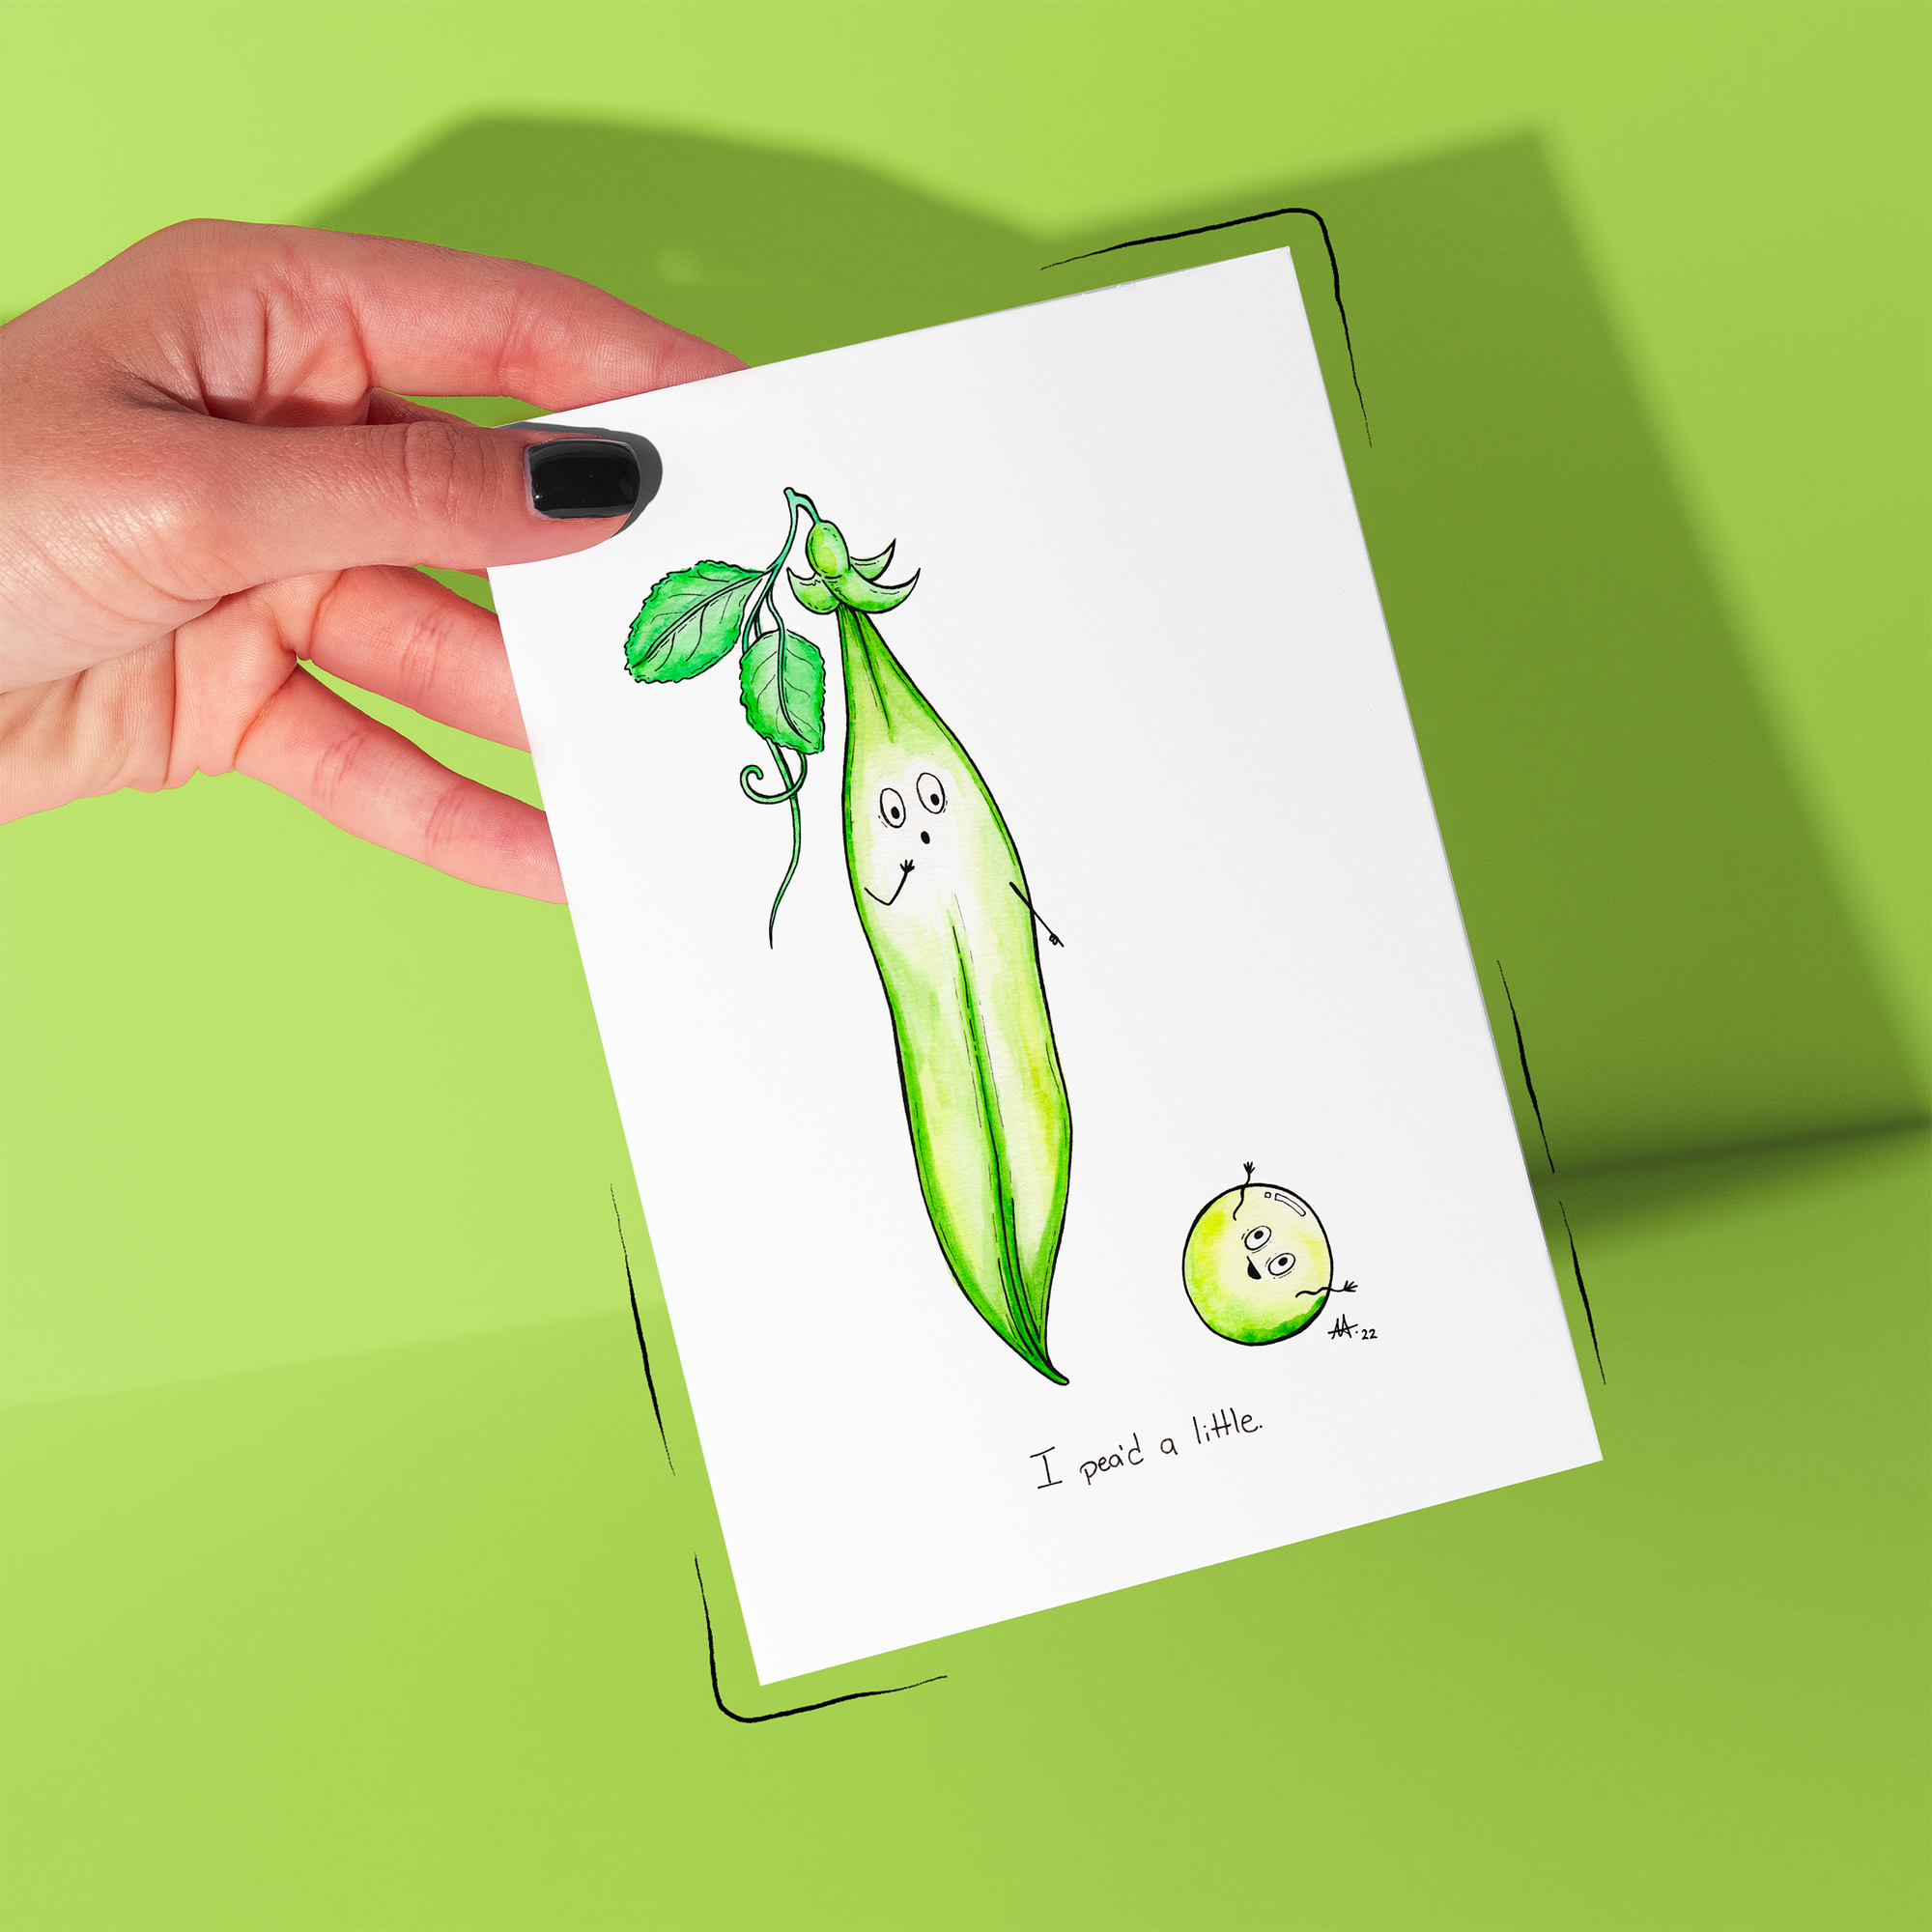 "I pea'd a little." - Greeting Card / Small Print